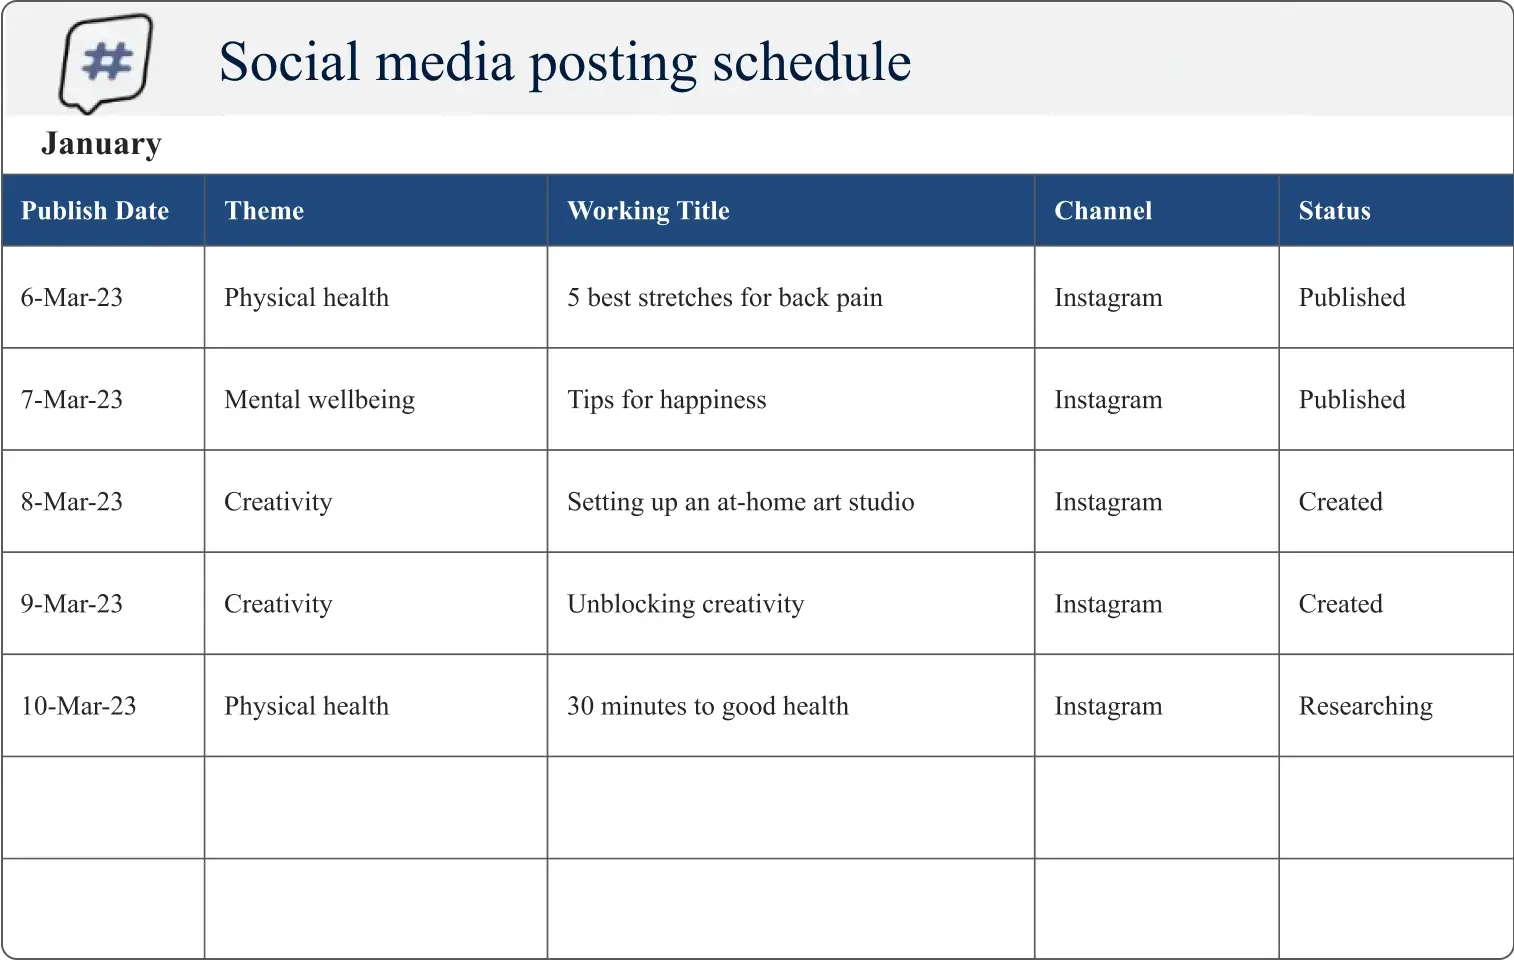 Example of a social media posting schedule based on a template from Microsoft Create.